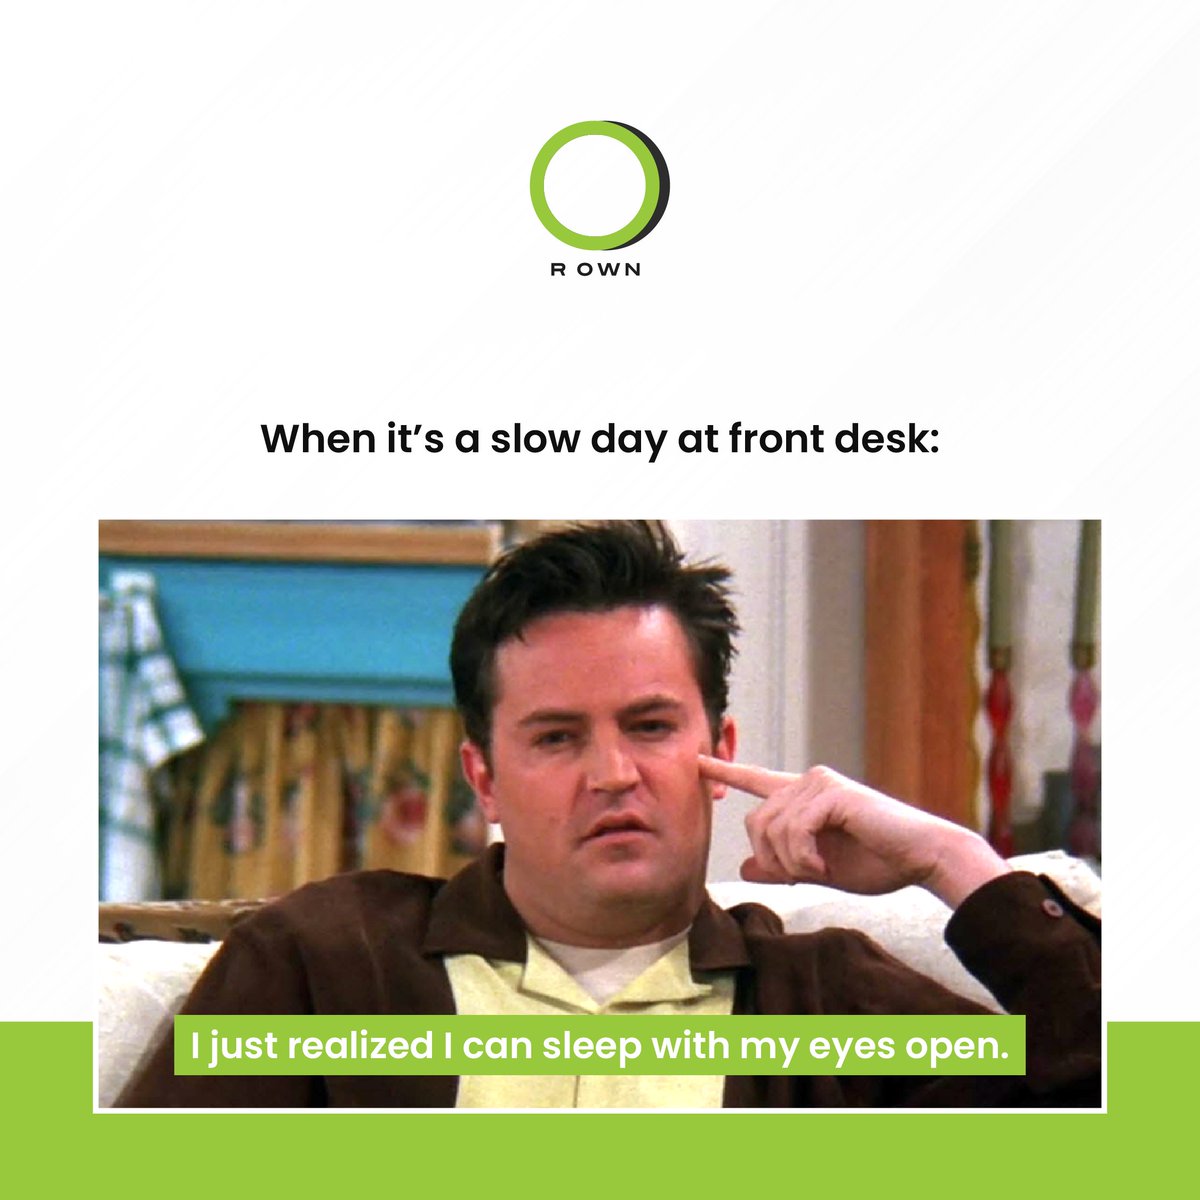 When work meets boredom, Tag your buddies who are front desk workers.
.
.
#rown #RownApp #community #app #technology #marketing #hospitality #applications #communityapp #retvensservices